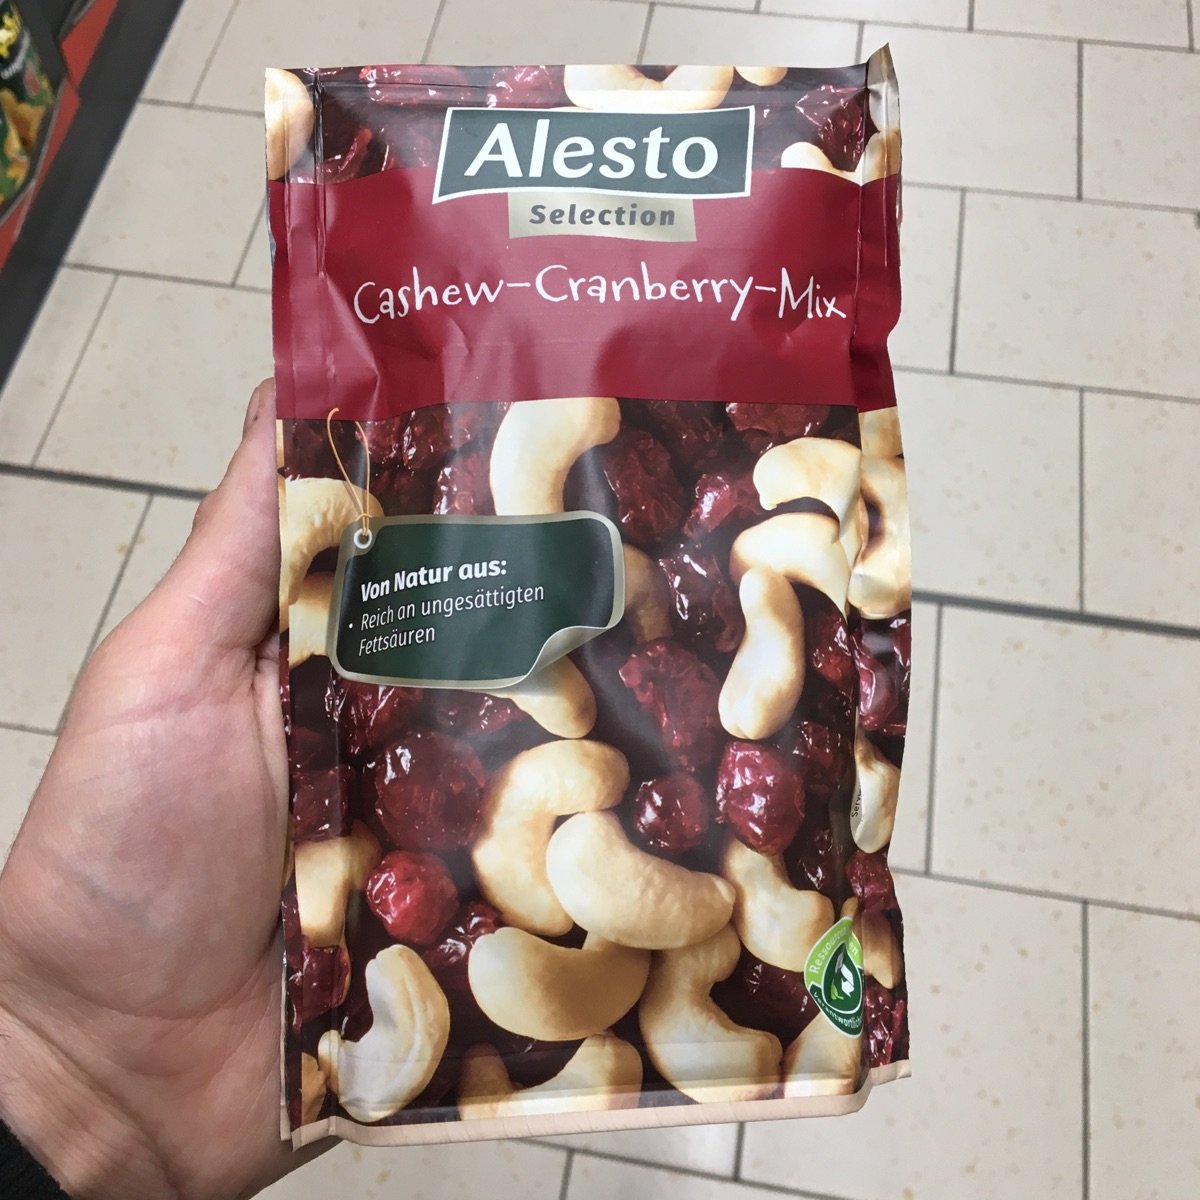 Mix Alesto Cashew Review | Cranberry abillion and